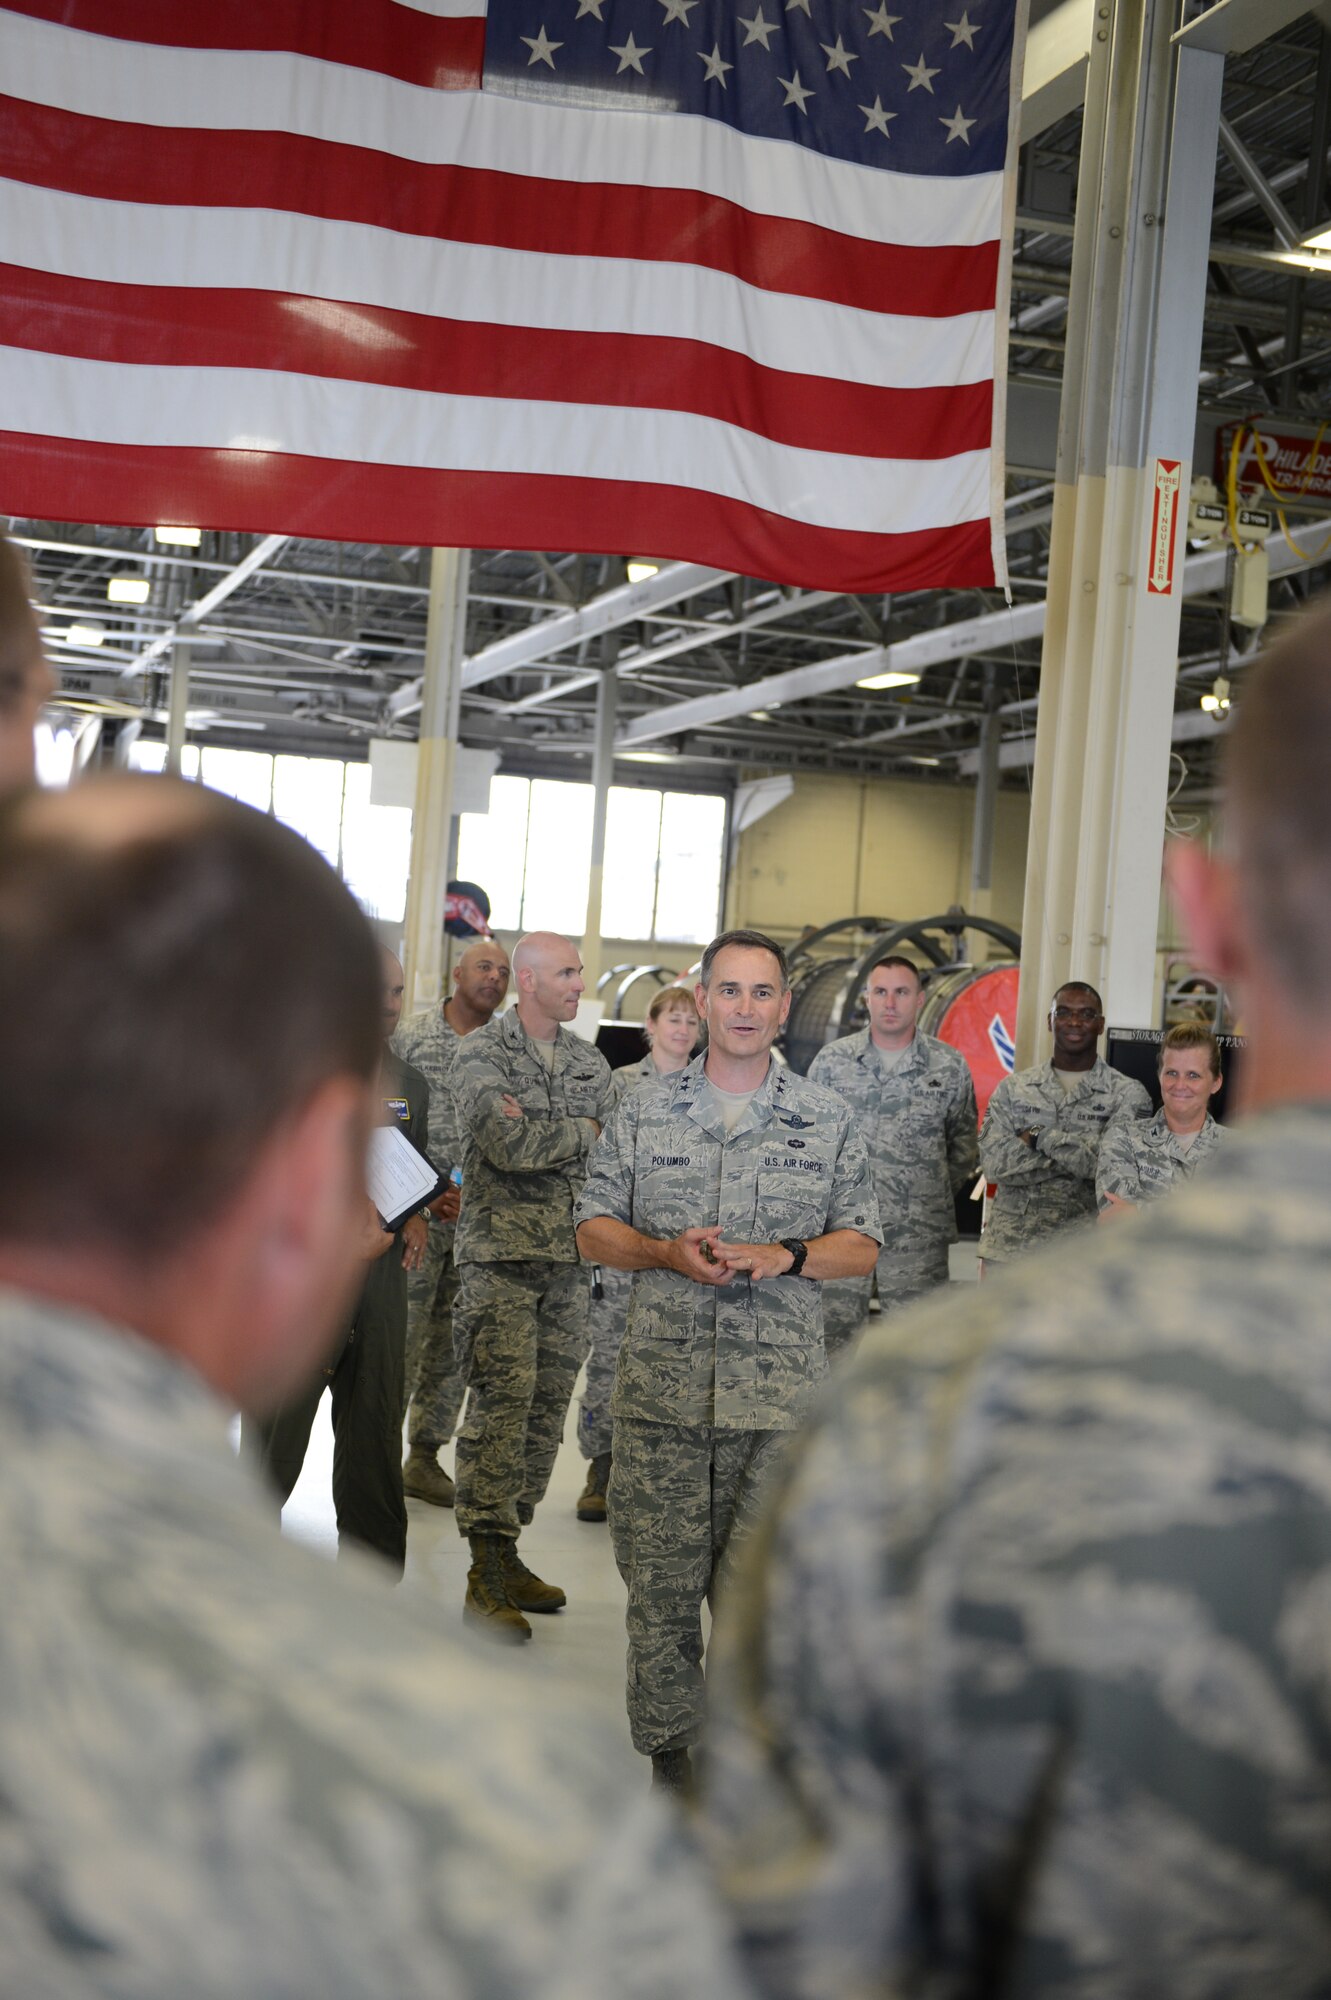 Maj. Gen. Jake Polumbo, 9th Air Force commander, speaks to members of the 20th Component Maintenance Squadron, propulsion flight, during a tour of 20th Fighter Wing at Shaw Air Force Base, S.C., July 1, 2013. Polumbo visited many different squadrons across base during his tour like the 20th Medical Group and the 20th Logistics Readiness Squadron. (U.S. Air Force photo by Airman 1st Class Krystal M. Jeffers/Released)